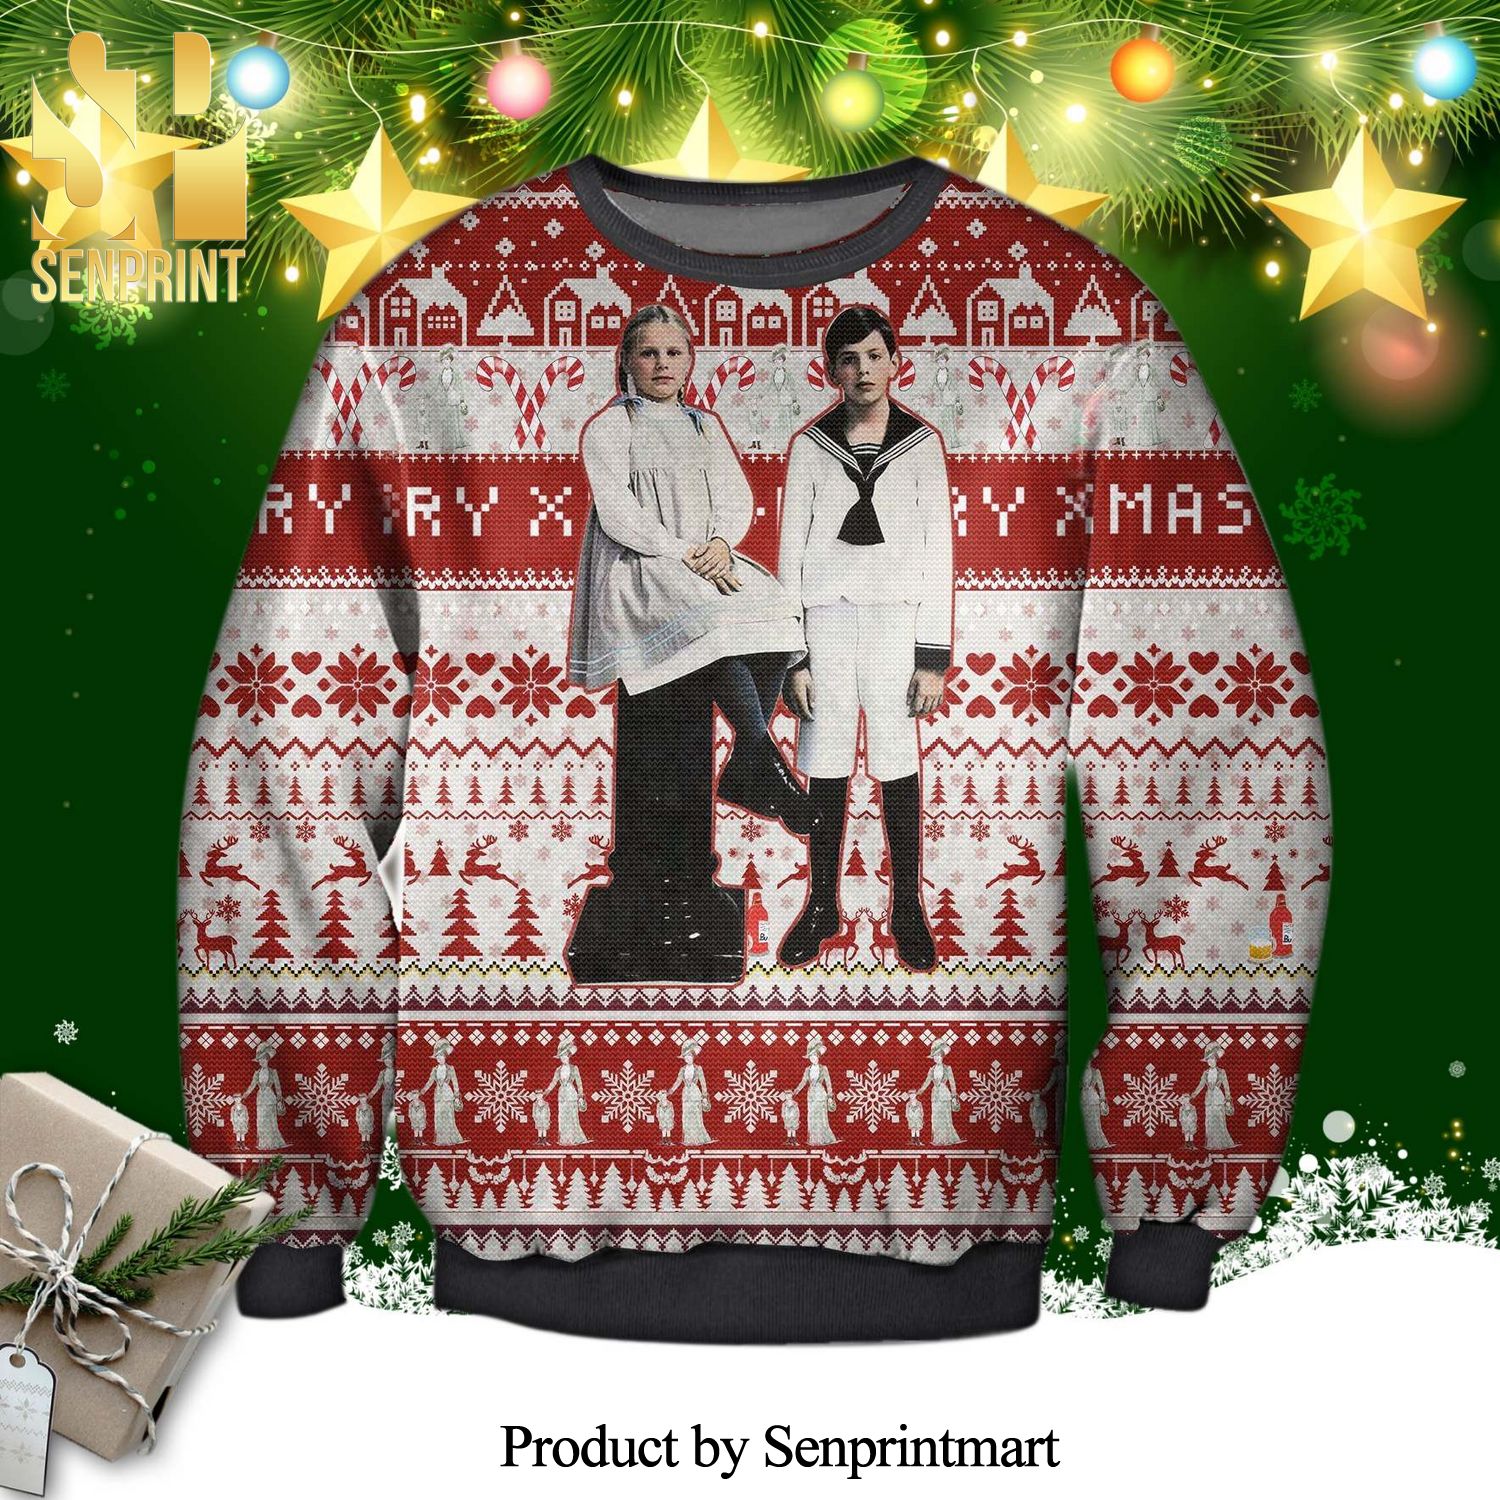 Emelie And Alexander Fanny Och Alexander Knitted Ugly Christmas Sweater